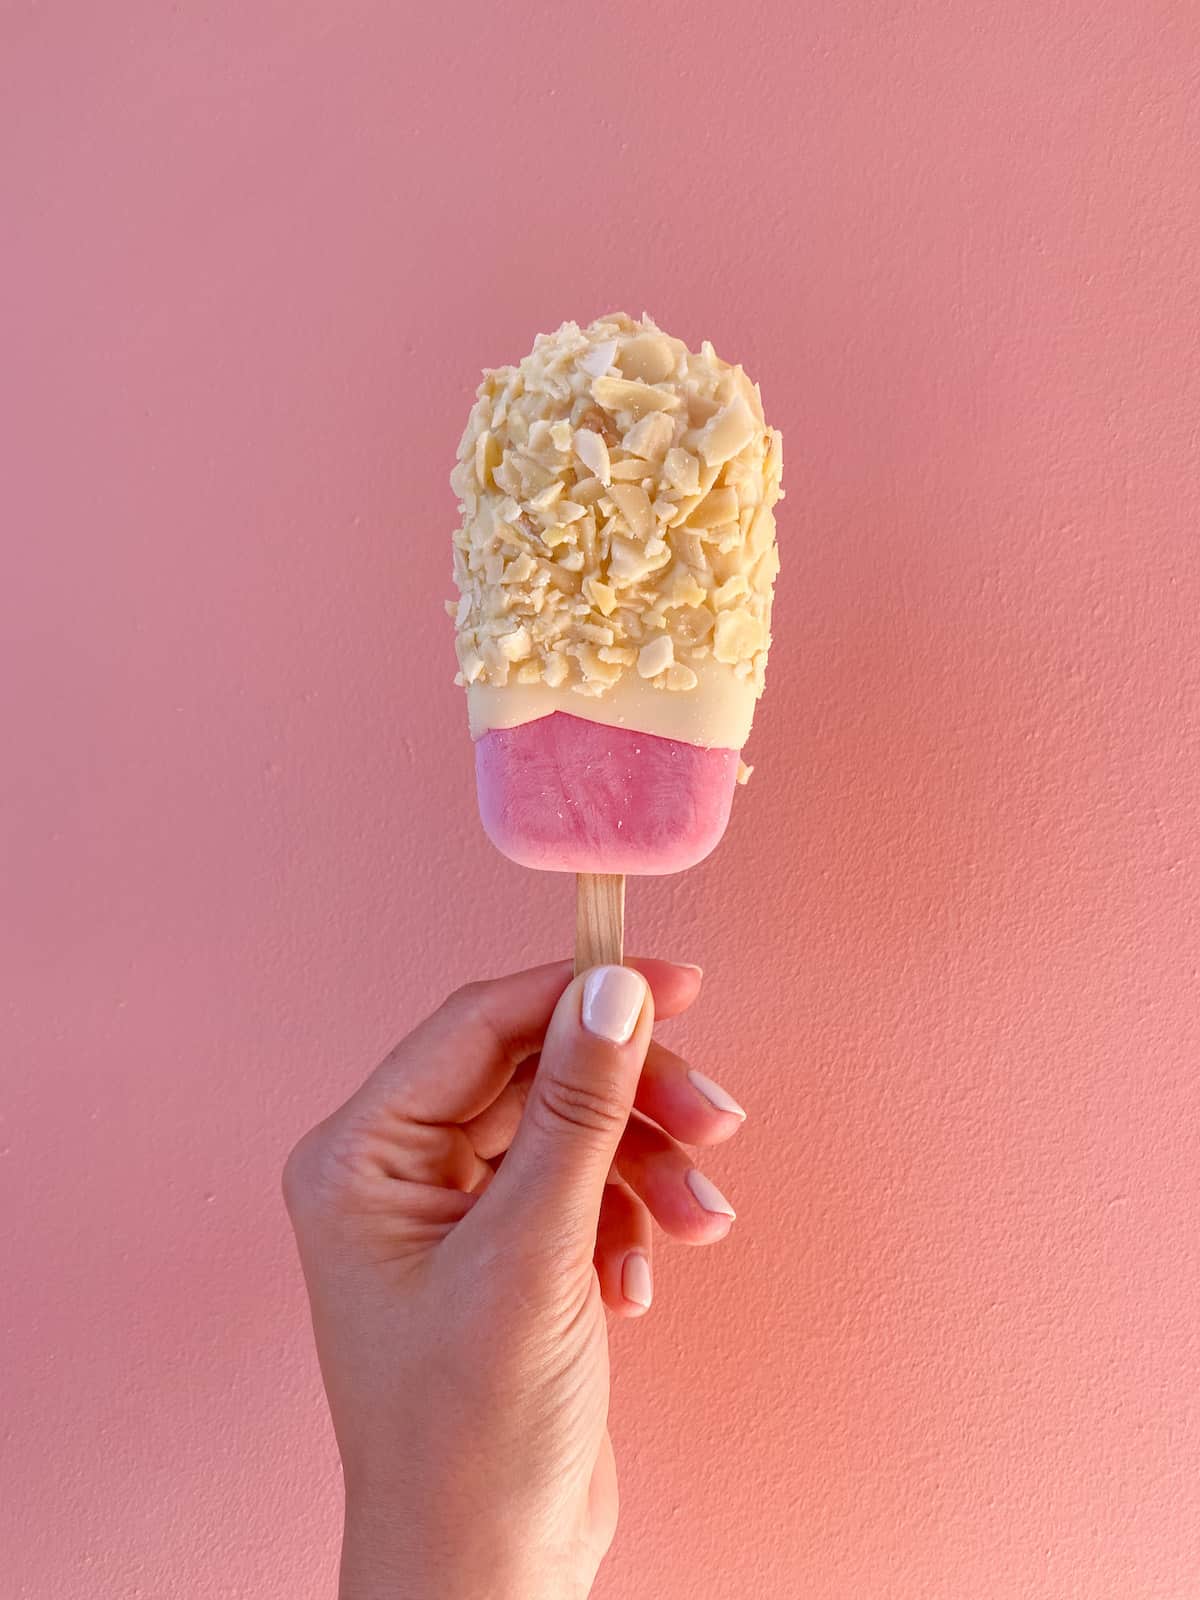 A hand holding up a pink raspberry ice cream bar that has been dipped in white chocolate and flaked almonds.